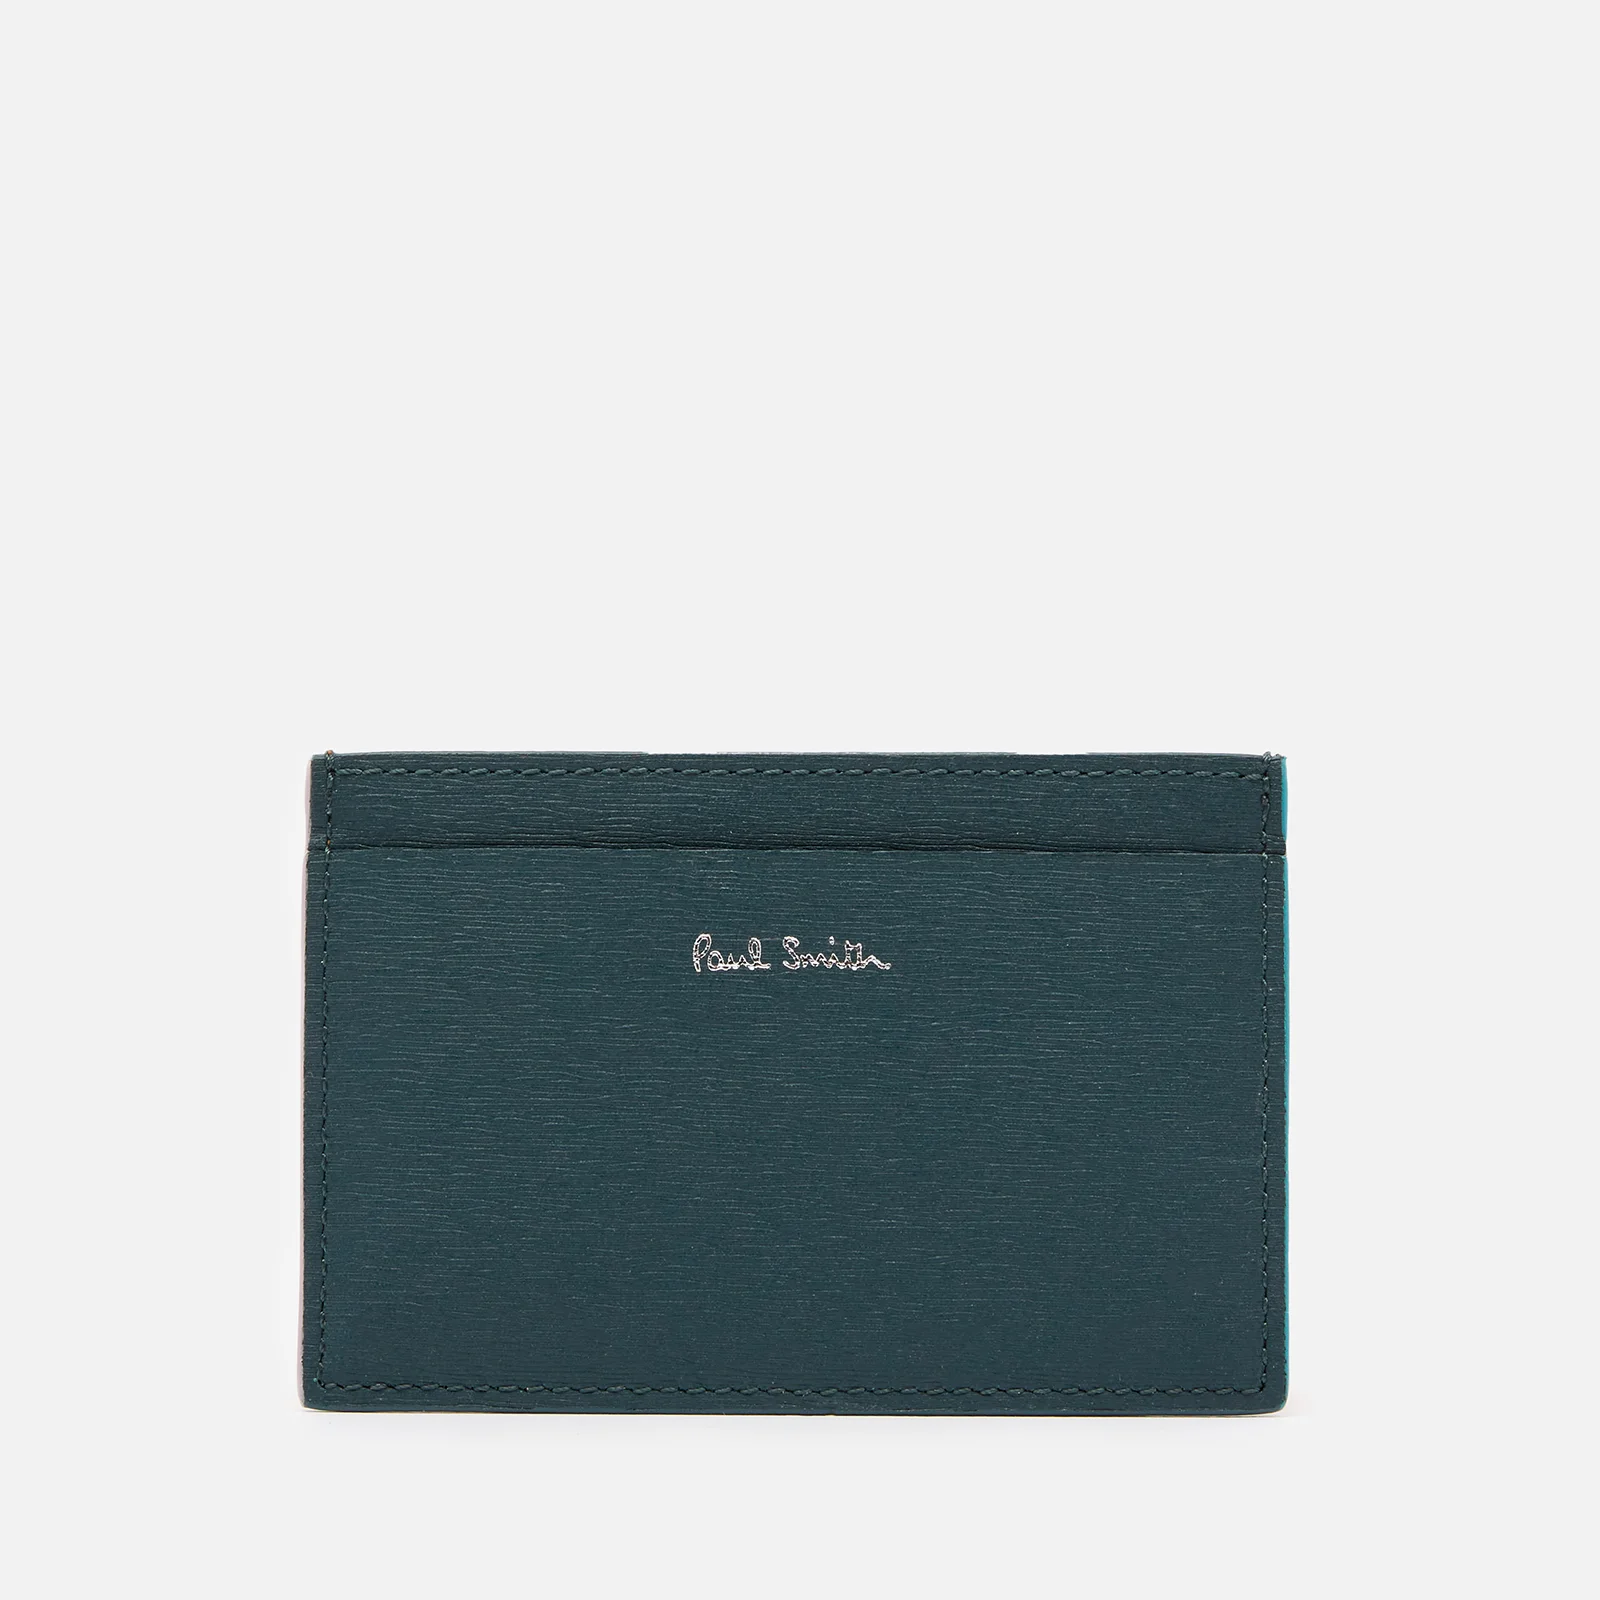 PS Paul Smith Men's Leather Credit Card Holder - Blue Image 1